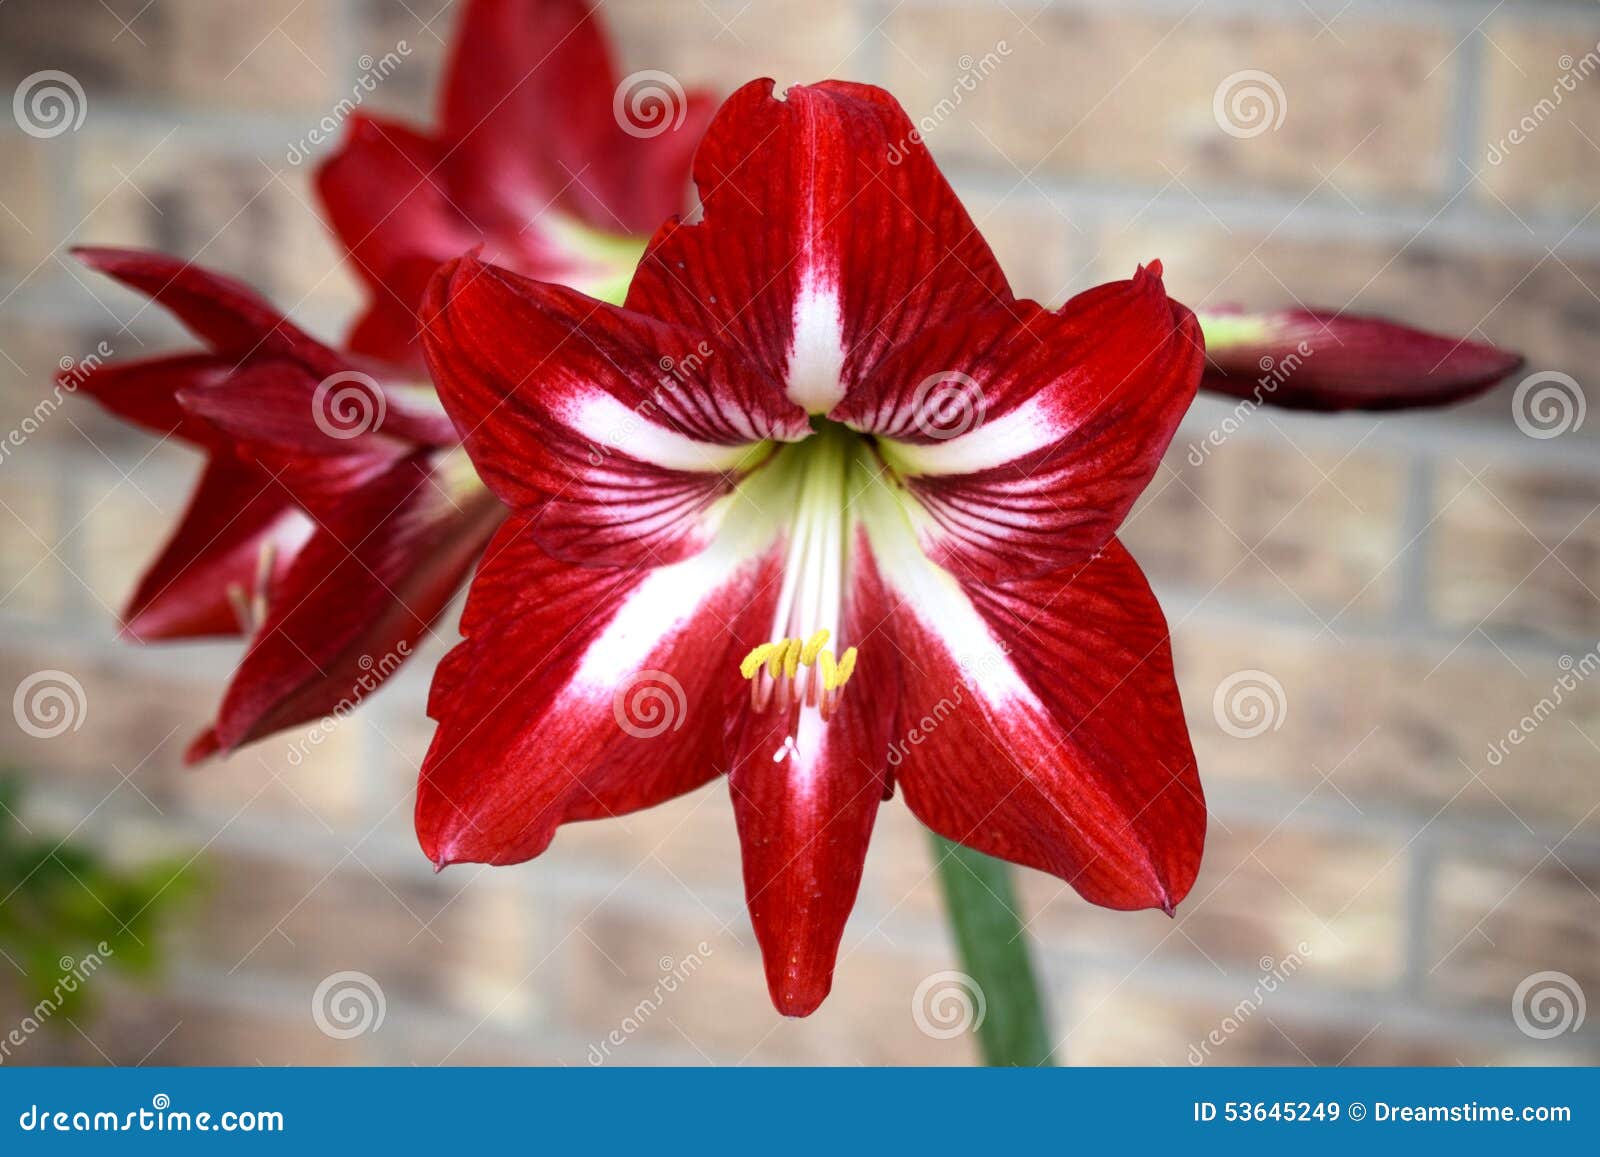 Red and White Hippeastrum stock image. Image of hippeastrum - 53645249